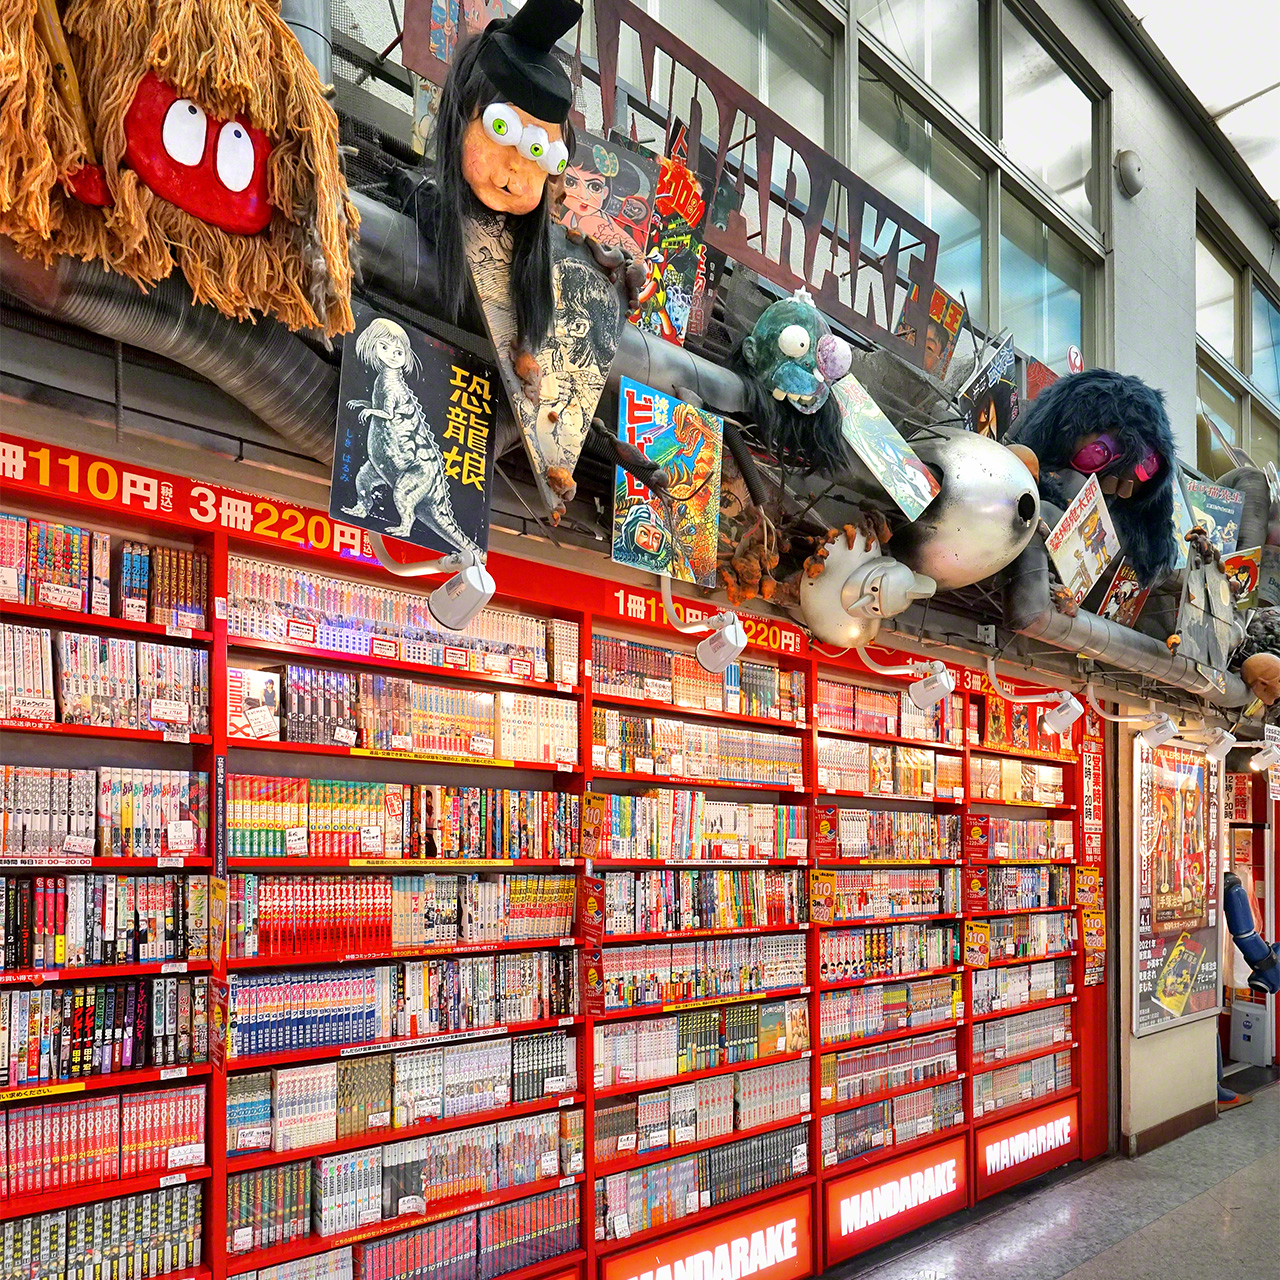 Mandarake Honten (“Headquarters”), on the third floor, boasts an impressive array of manga for boys and young adults.